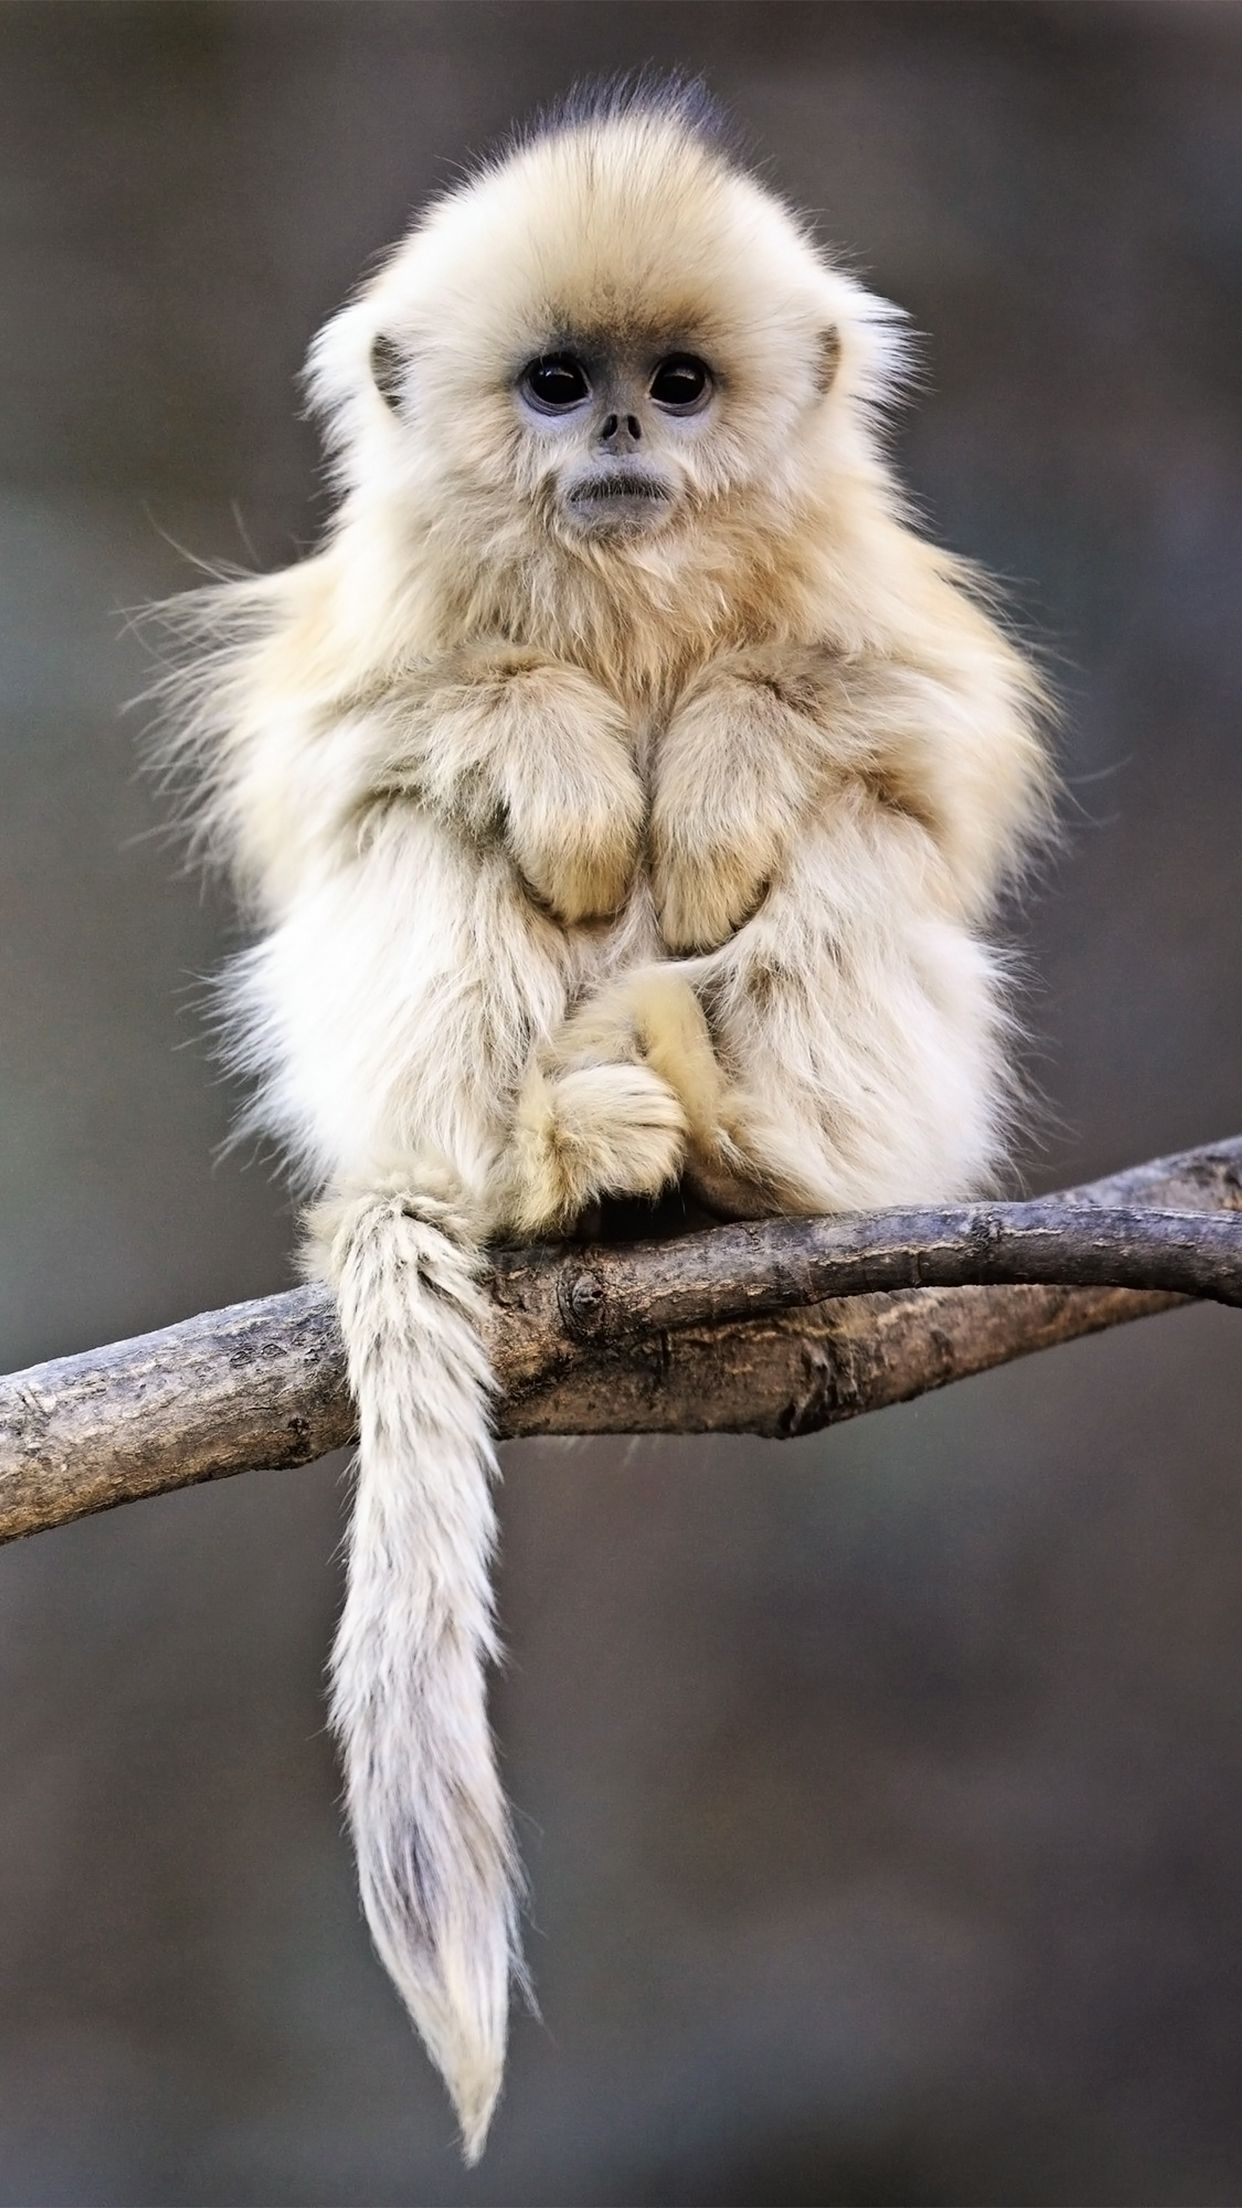 Cute Monkey Iphone Wallpapers